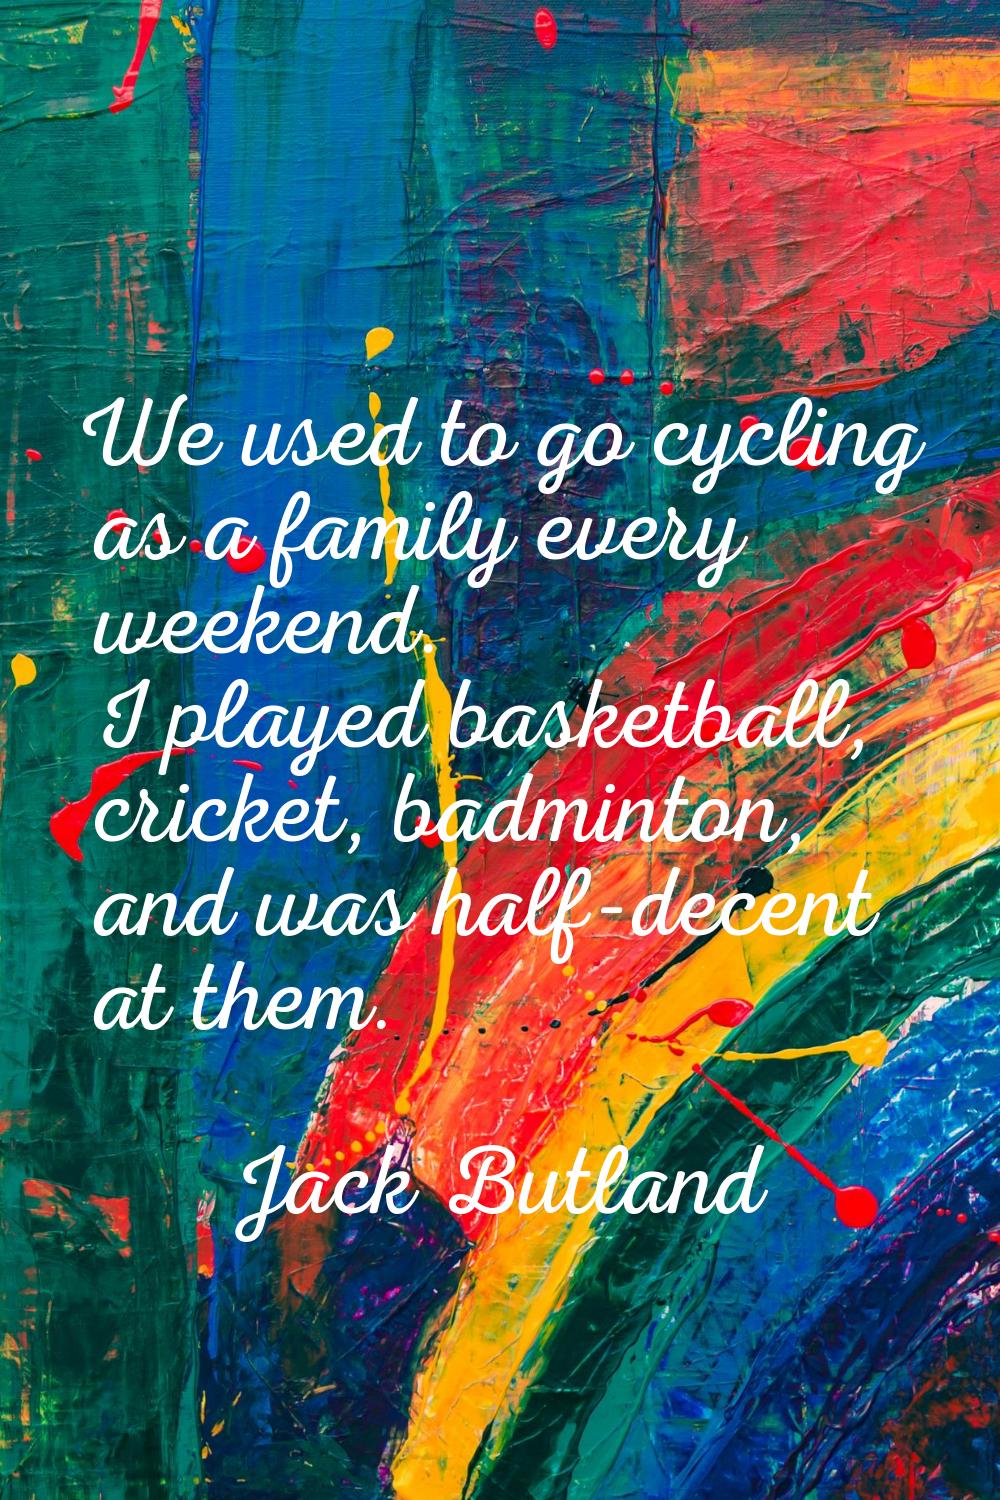 We used to go cycling as a family every weekend. I played basketball, cricket, badminton, and was h